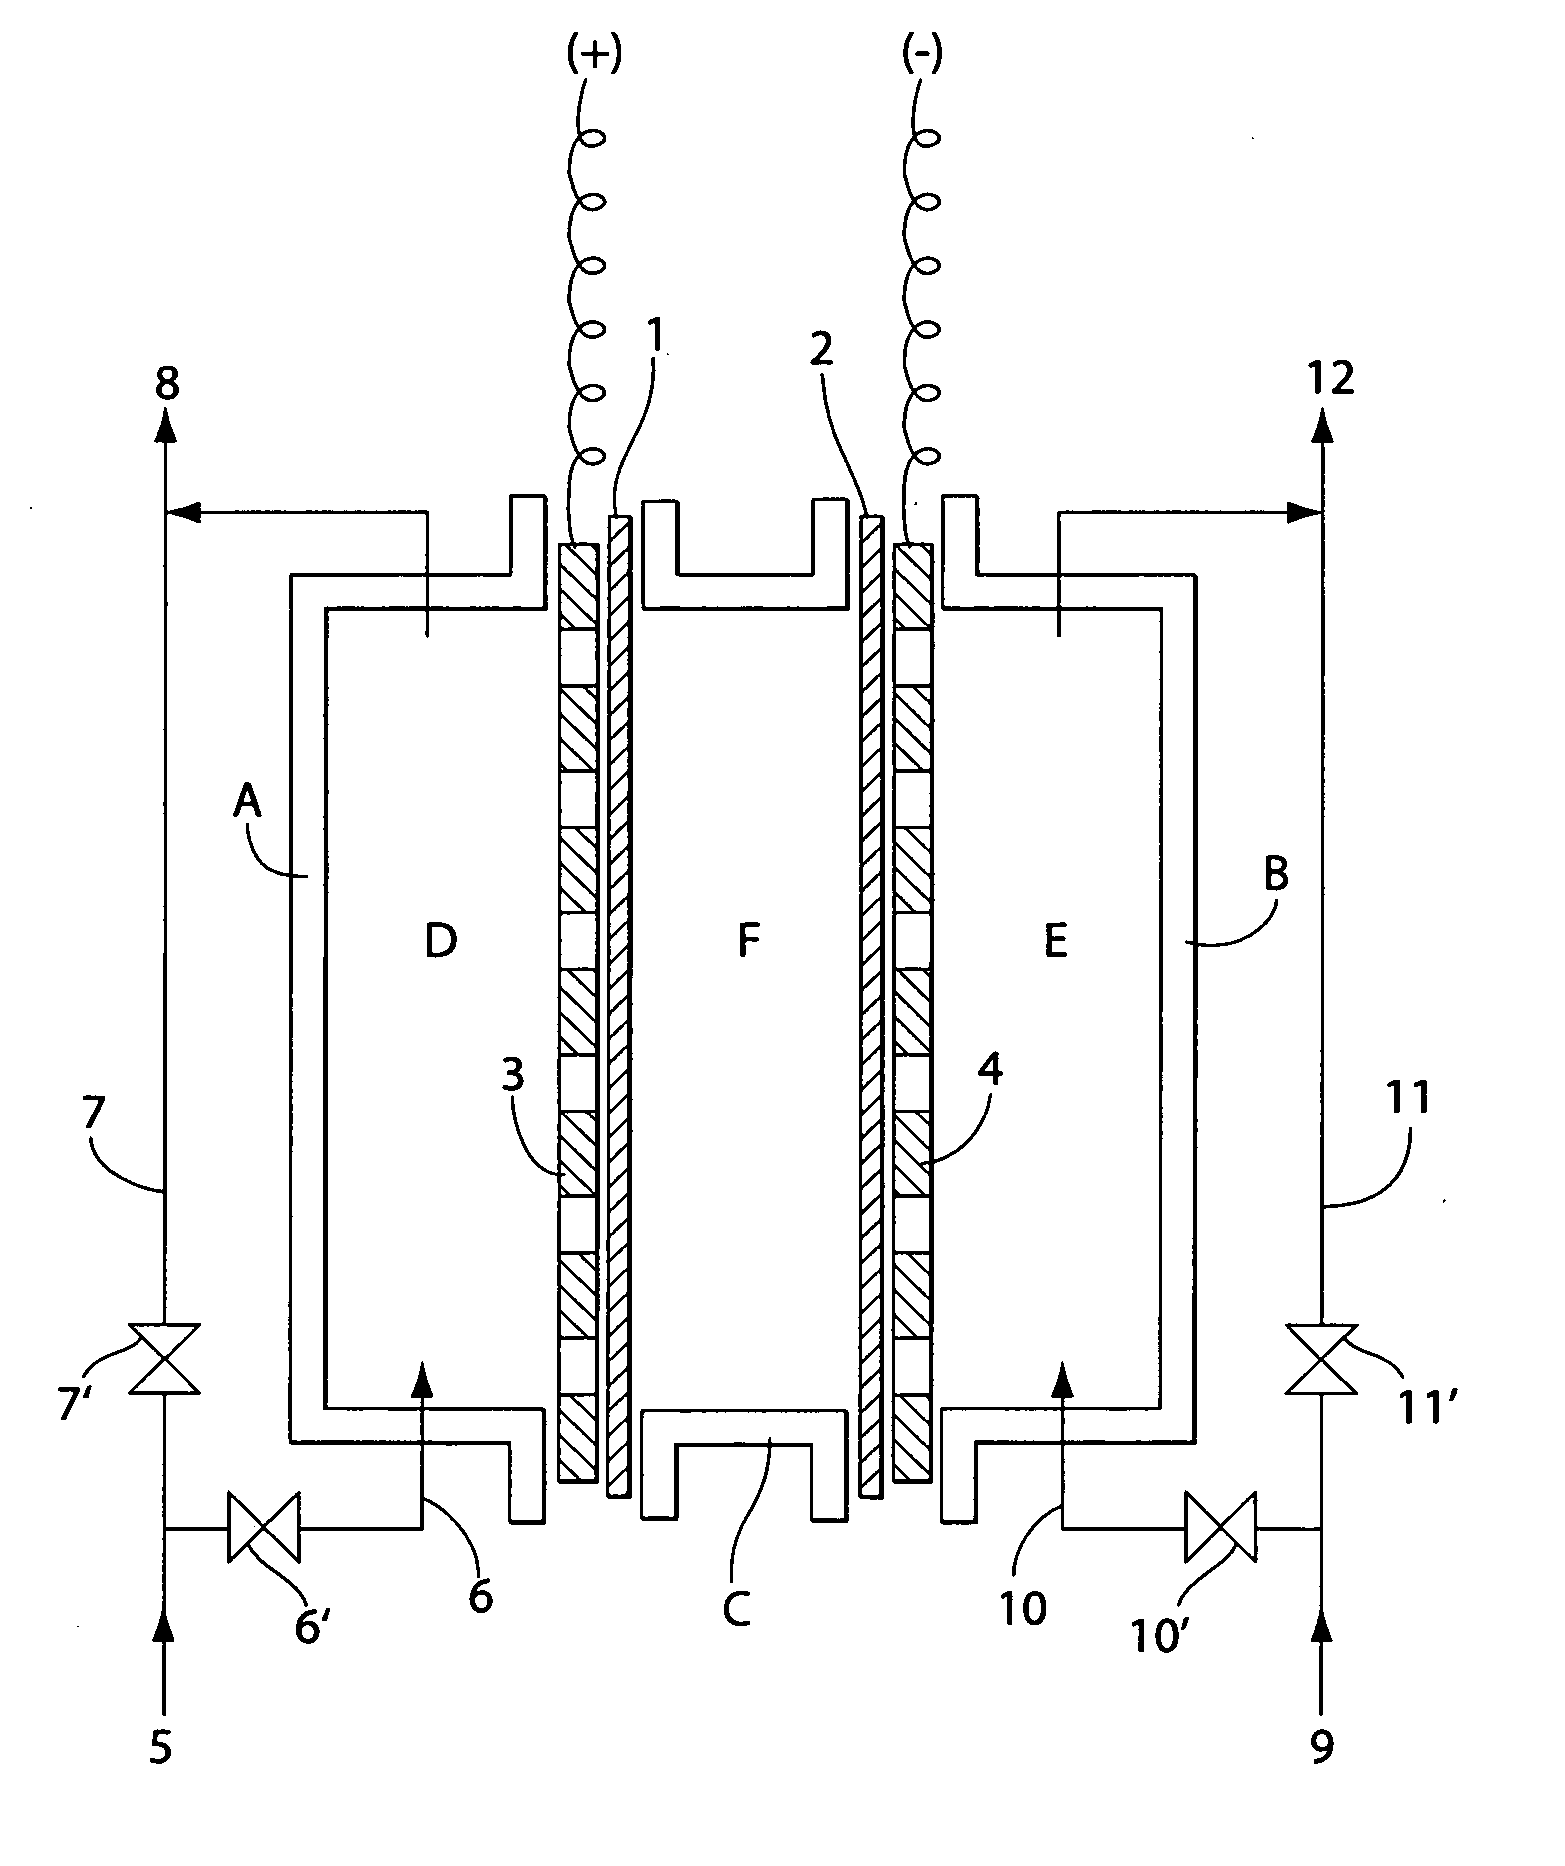 Production of electrolytic water